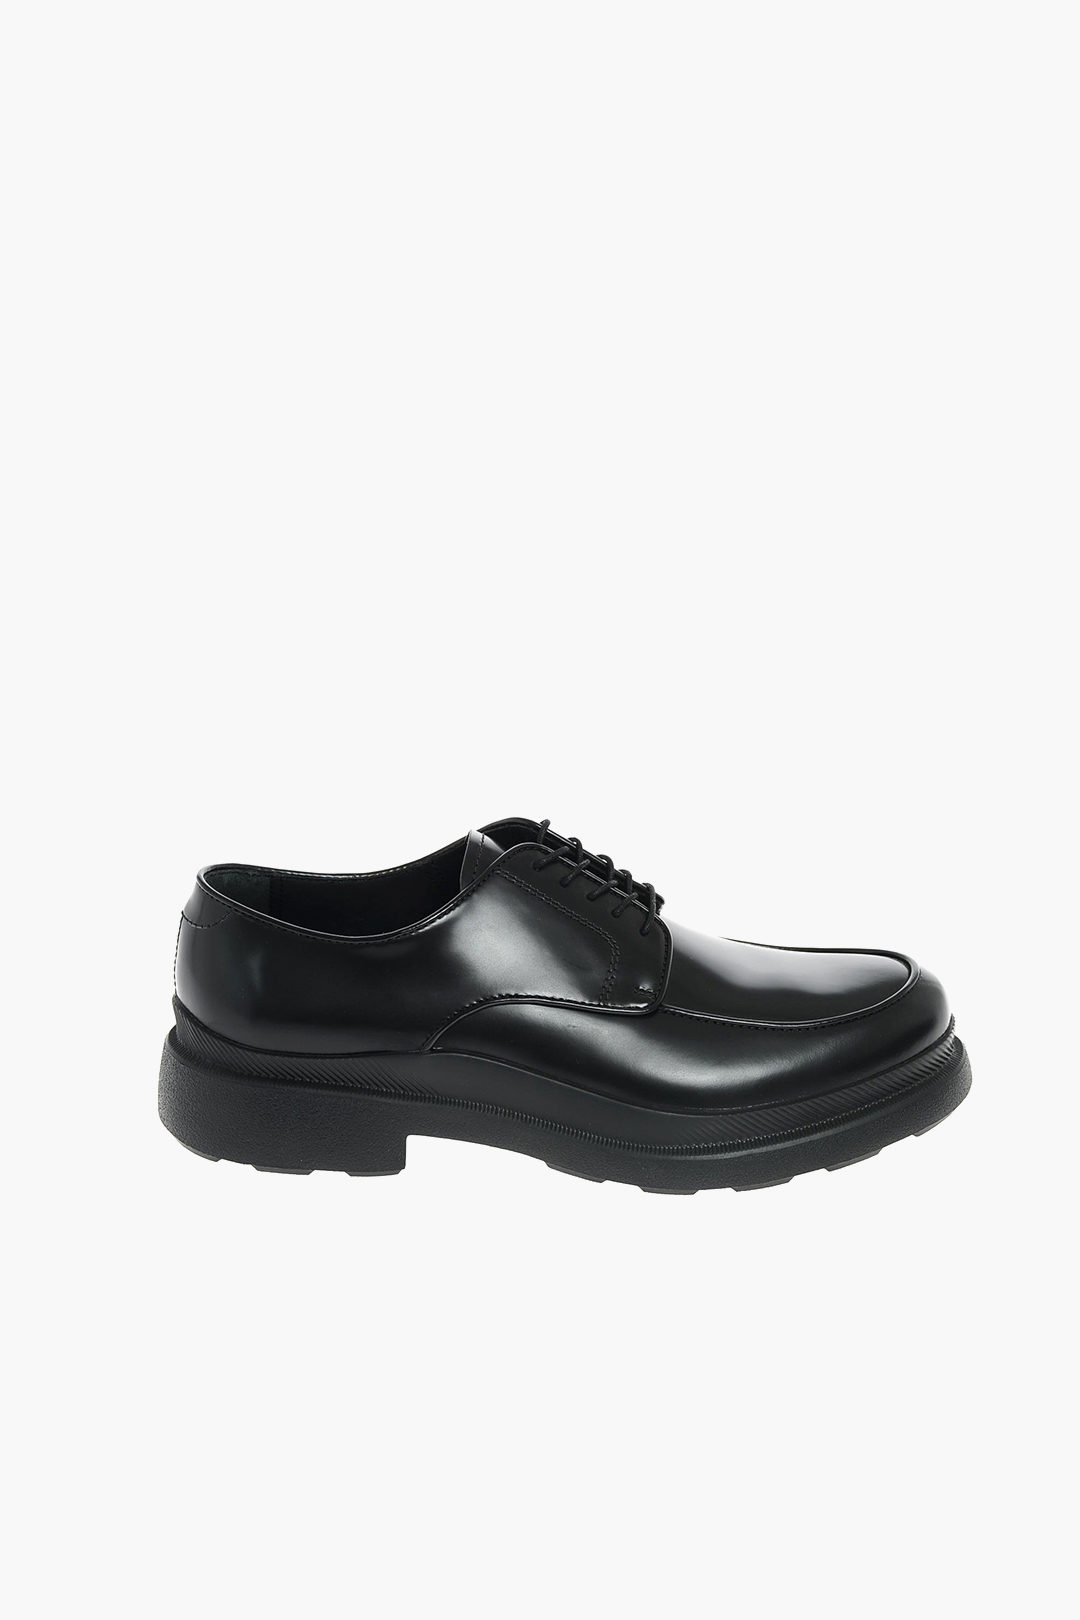 ZZEGNA Leather NEW CLASSIC Derby Shoes